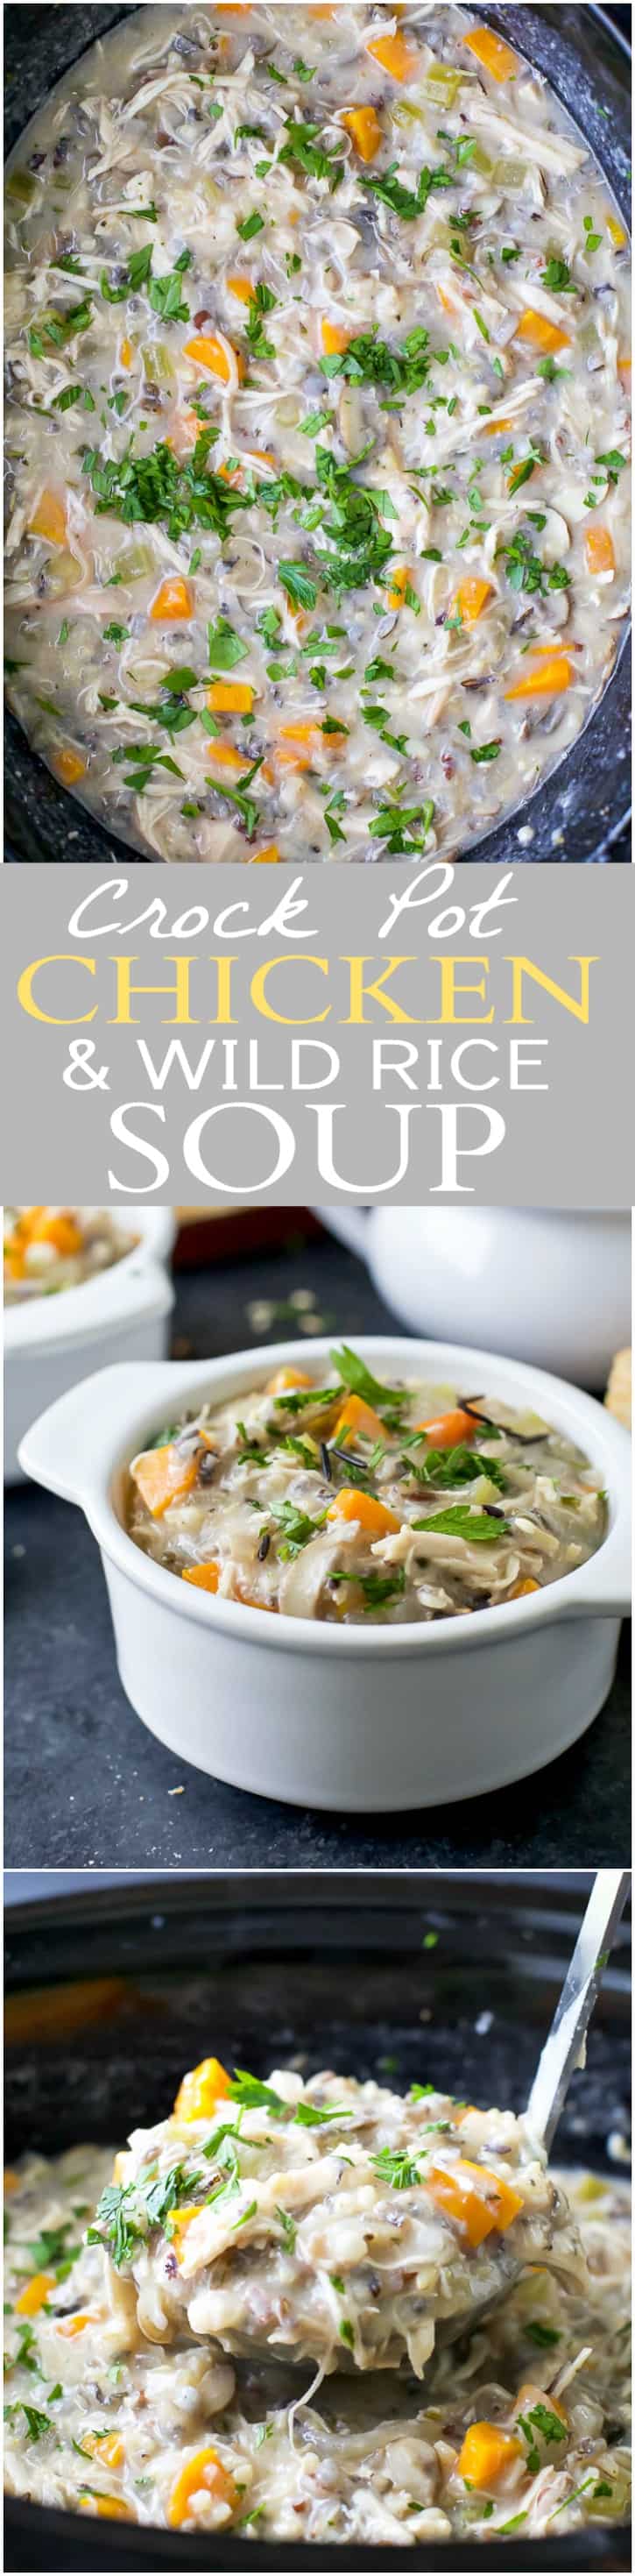 Pinterest collage for Crock Pot Chicken and Wild Rice Soup recipe